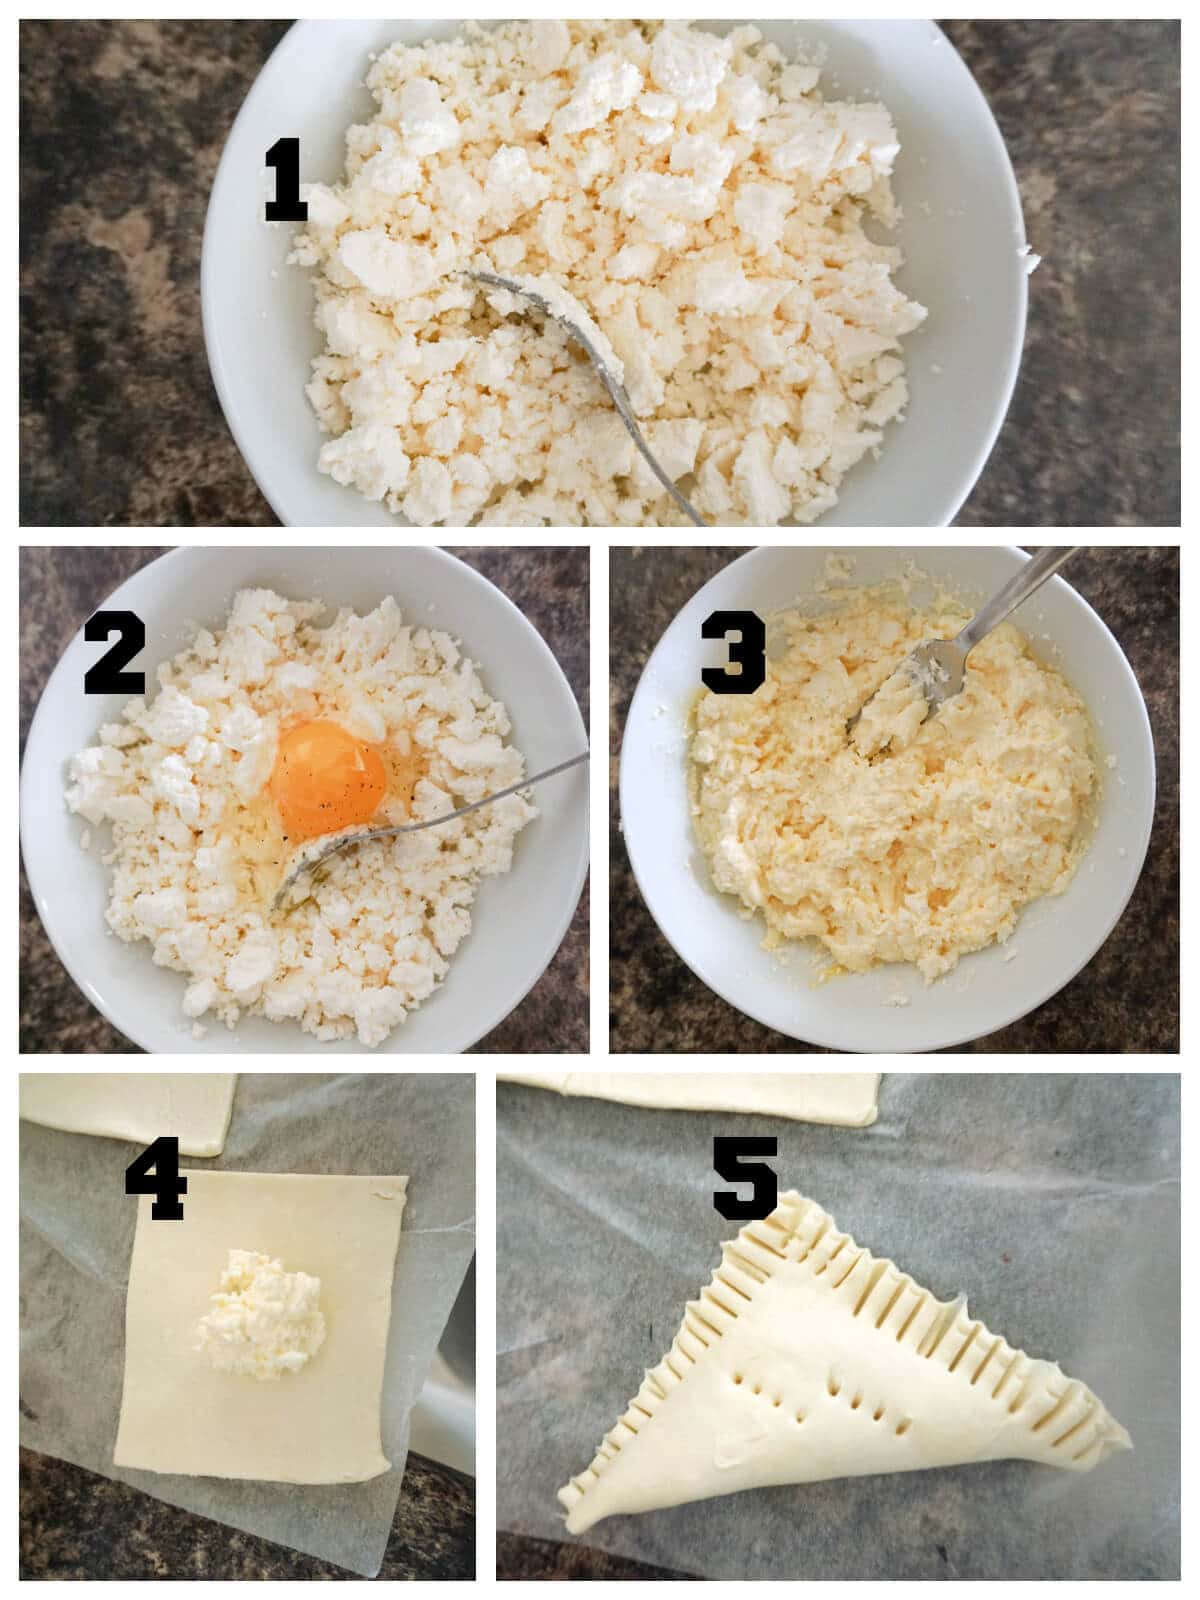 Collage of 5 pictures to show how to make cheese pastries.